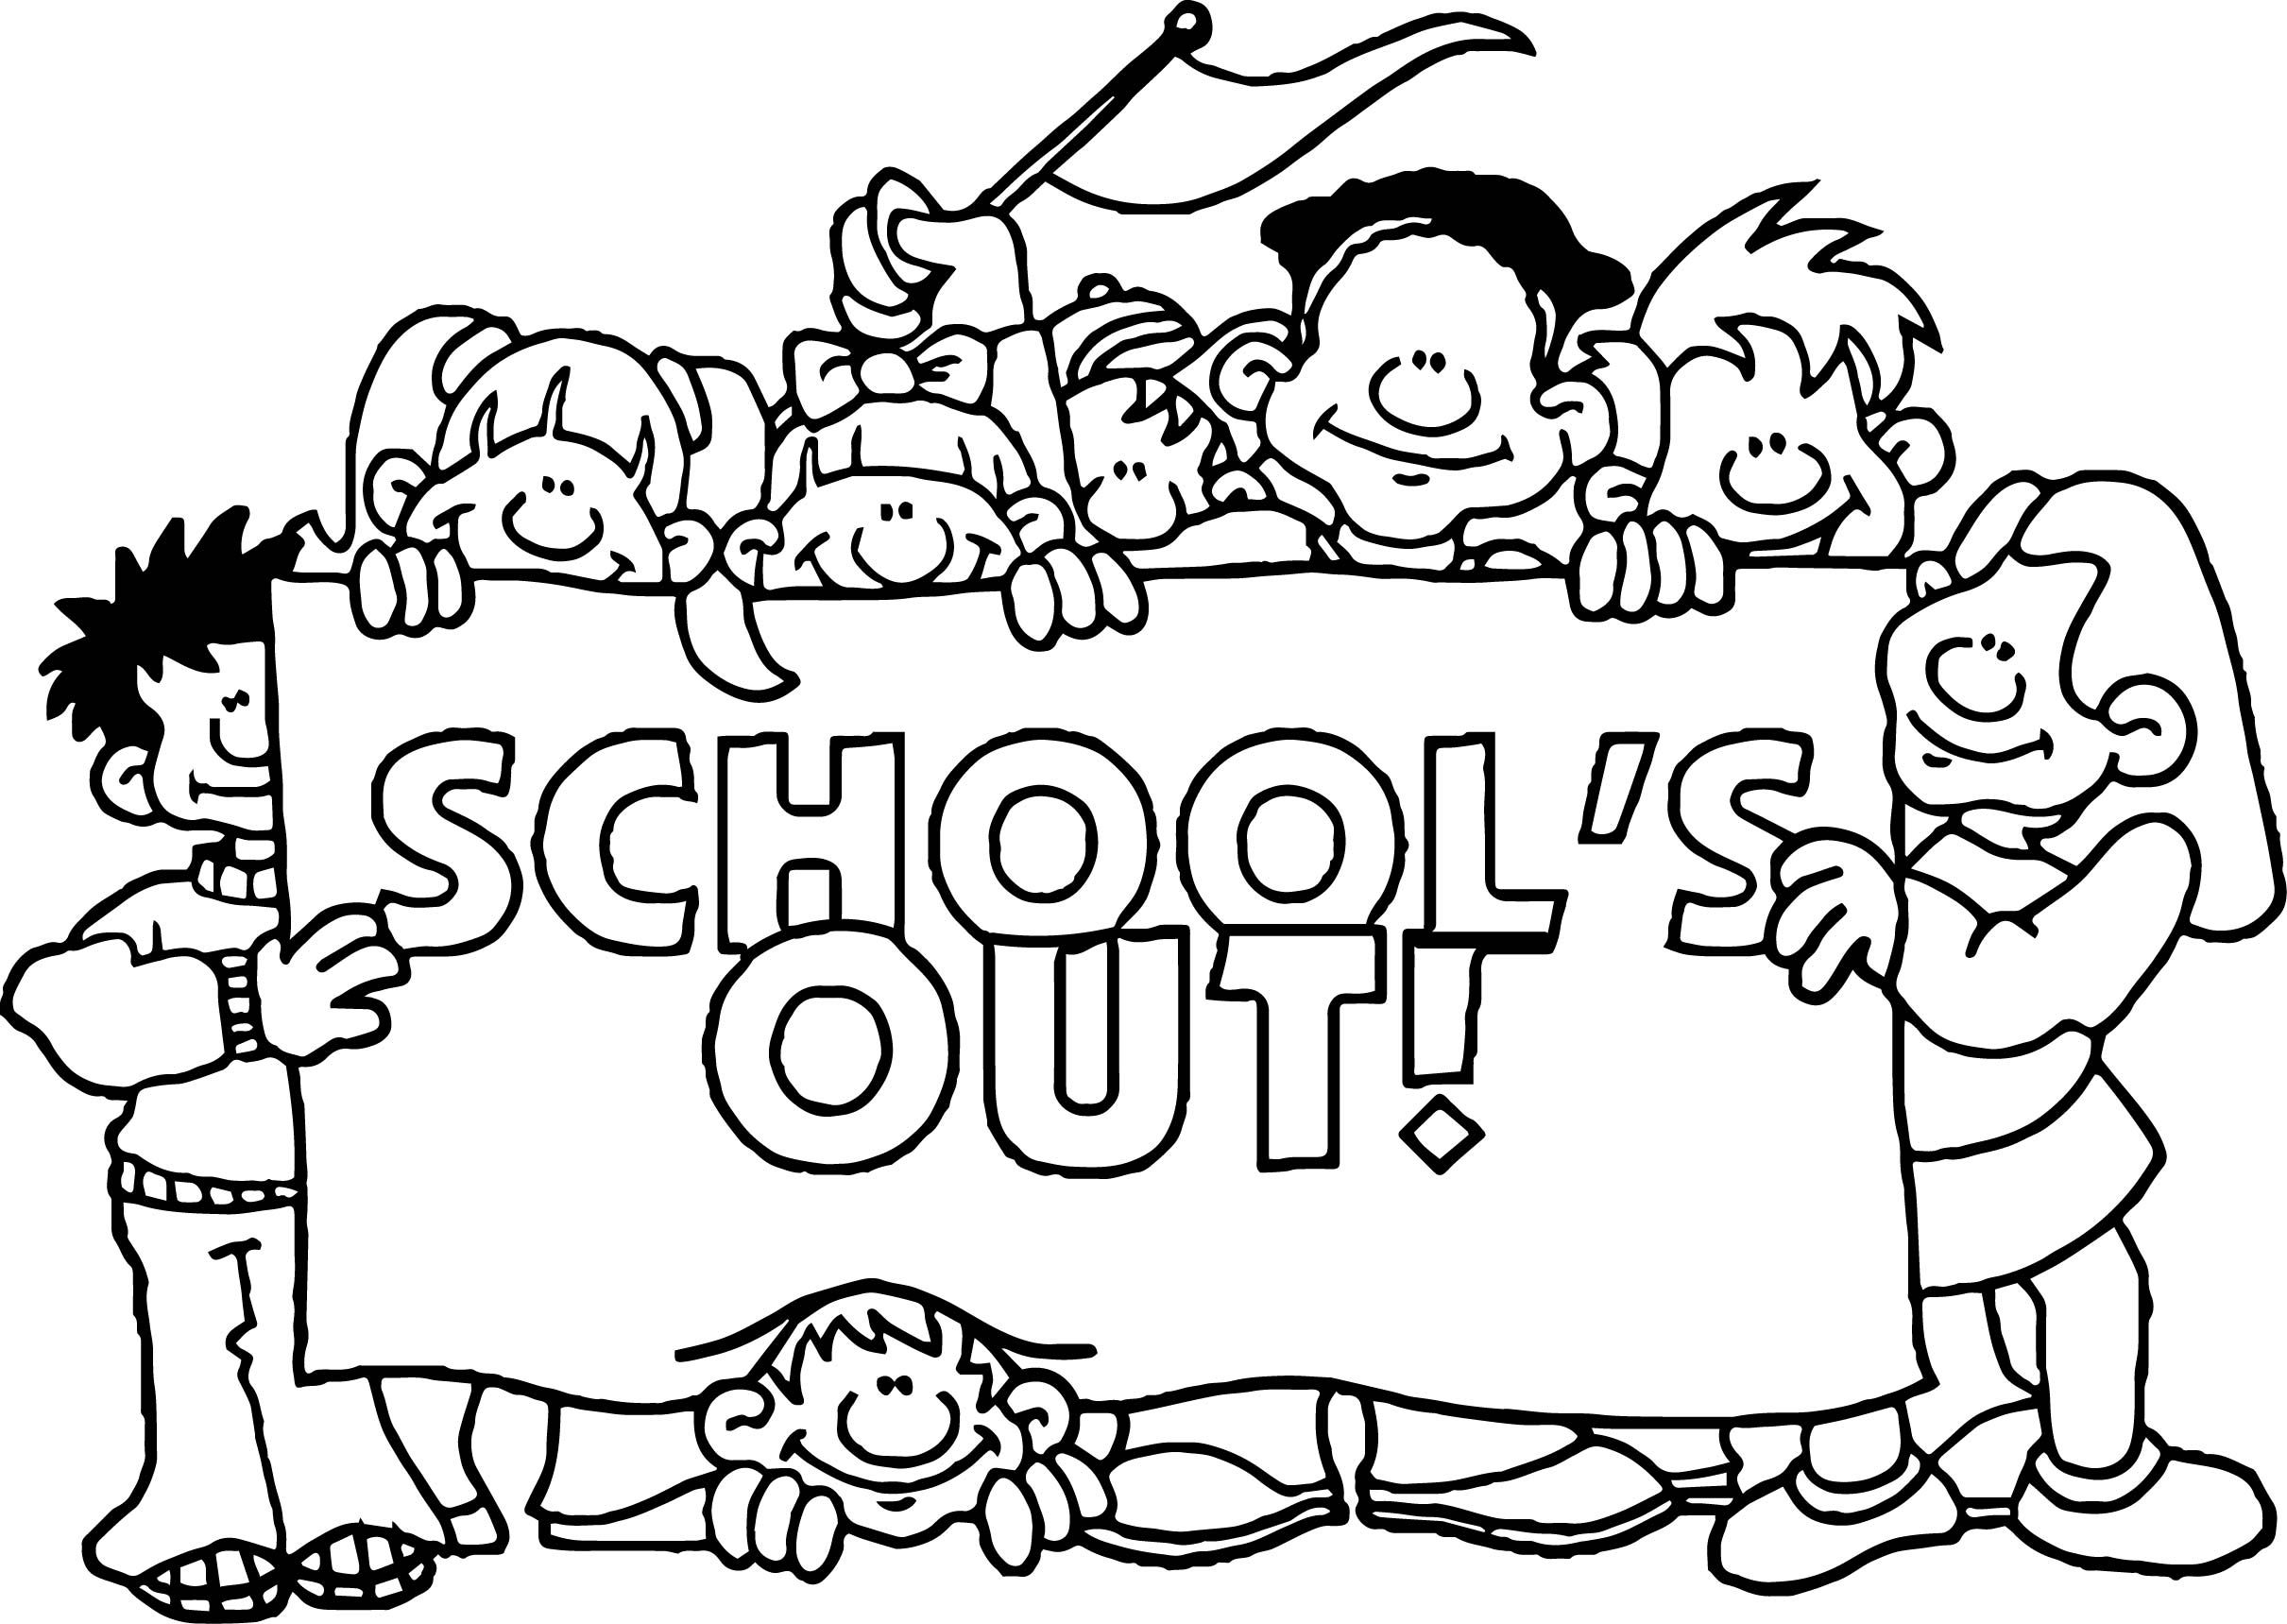 Awesome summer schools out coloring page boyama sayfalarä